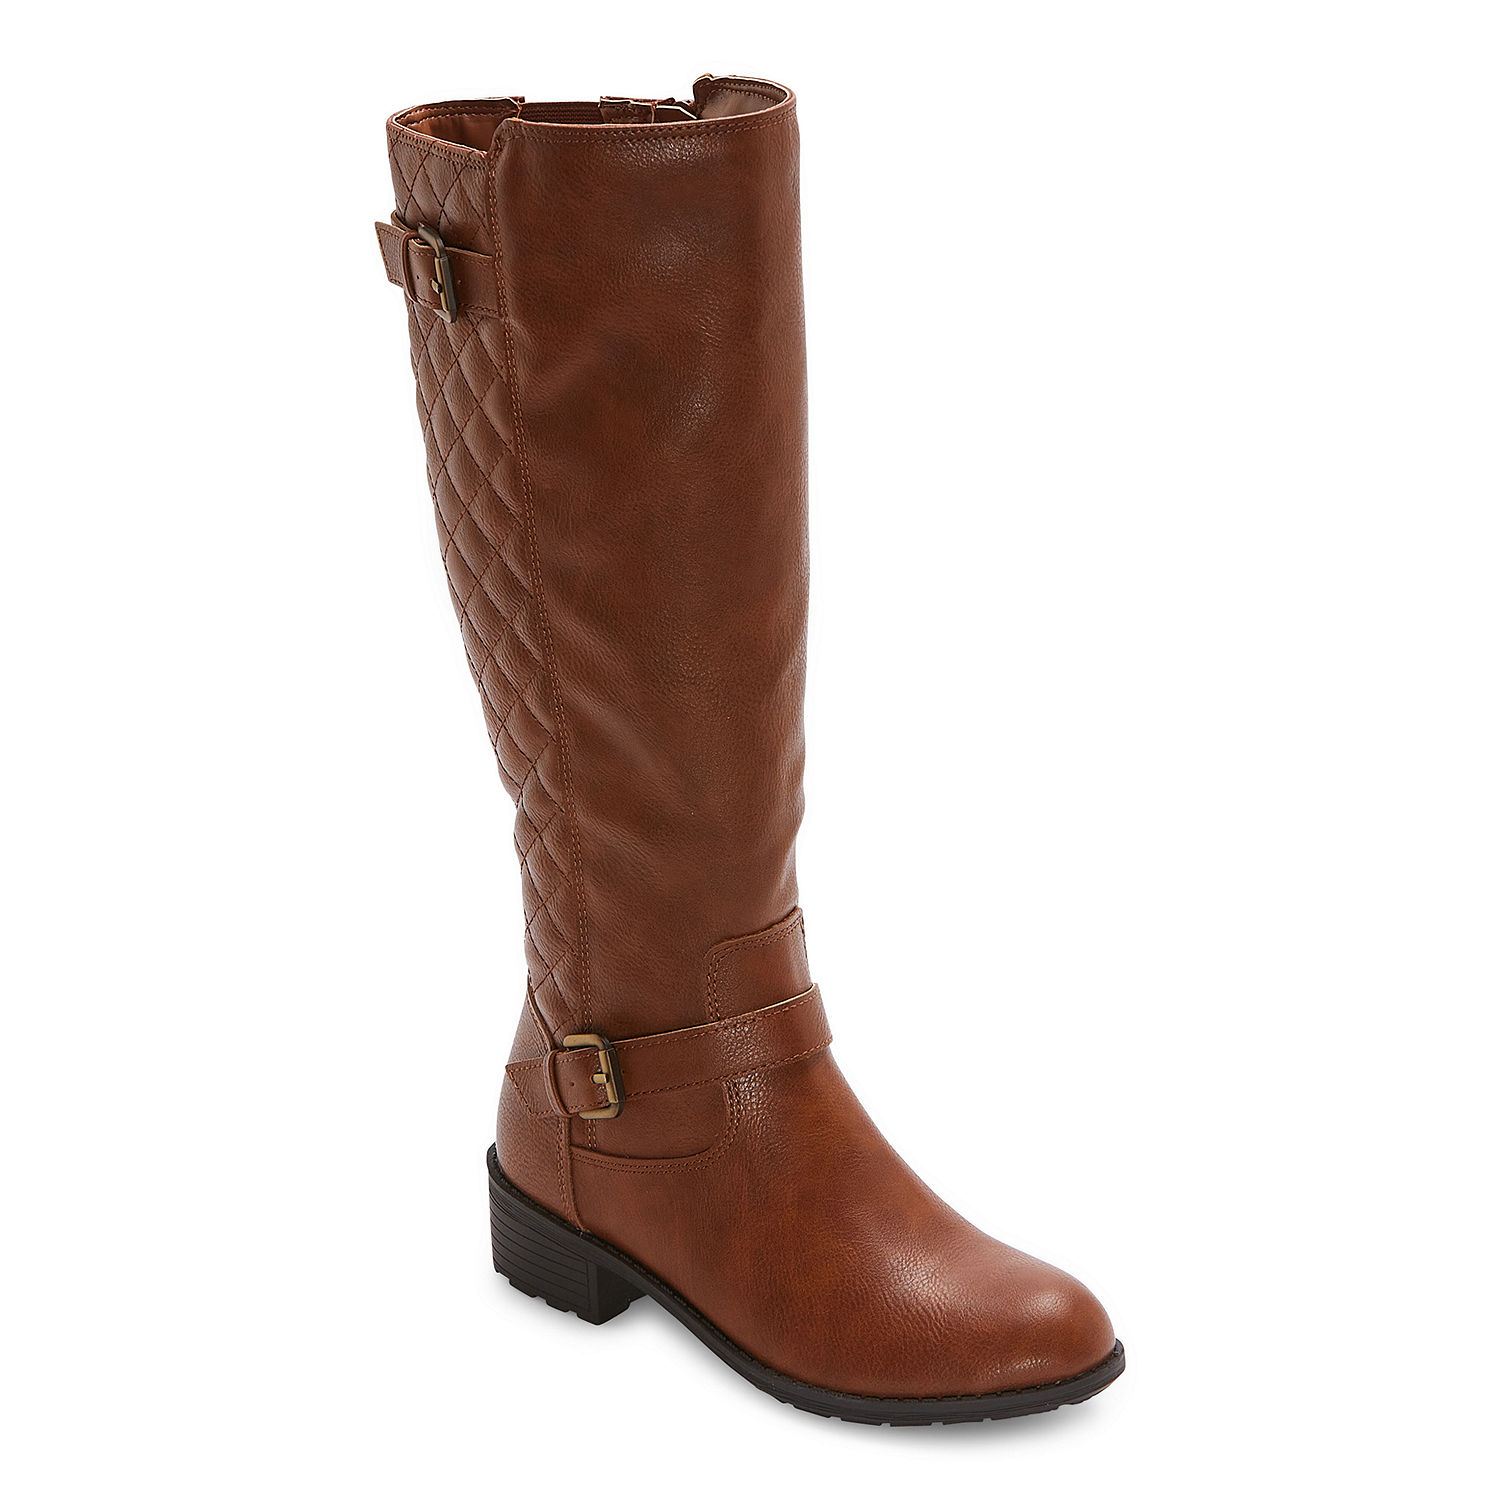 St. John's Bay Womens Darling Stacked Heel Riding Boots - JCPenney